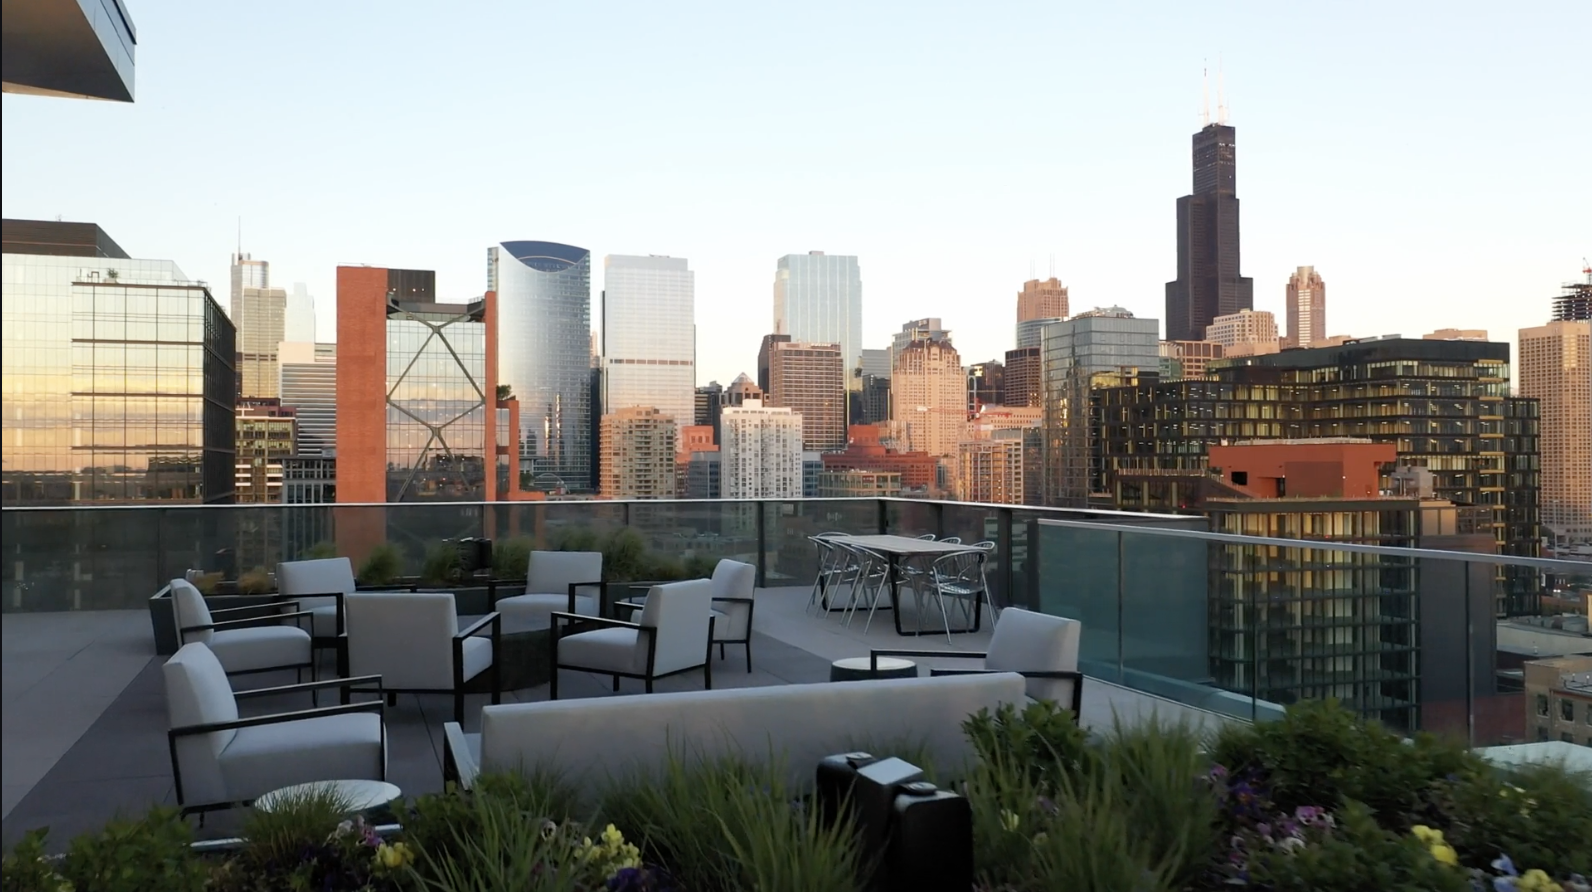 The building’s rooftop patio provides a sweeping view of Chicago’s skyline.